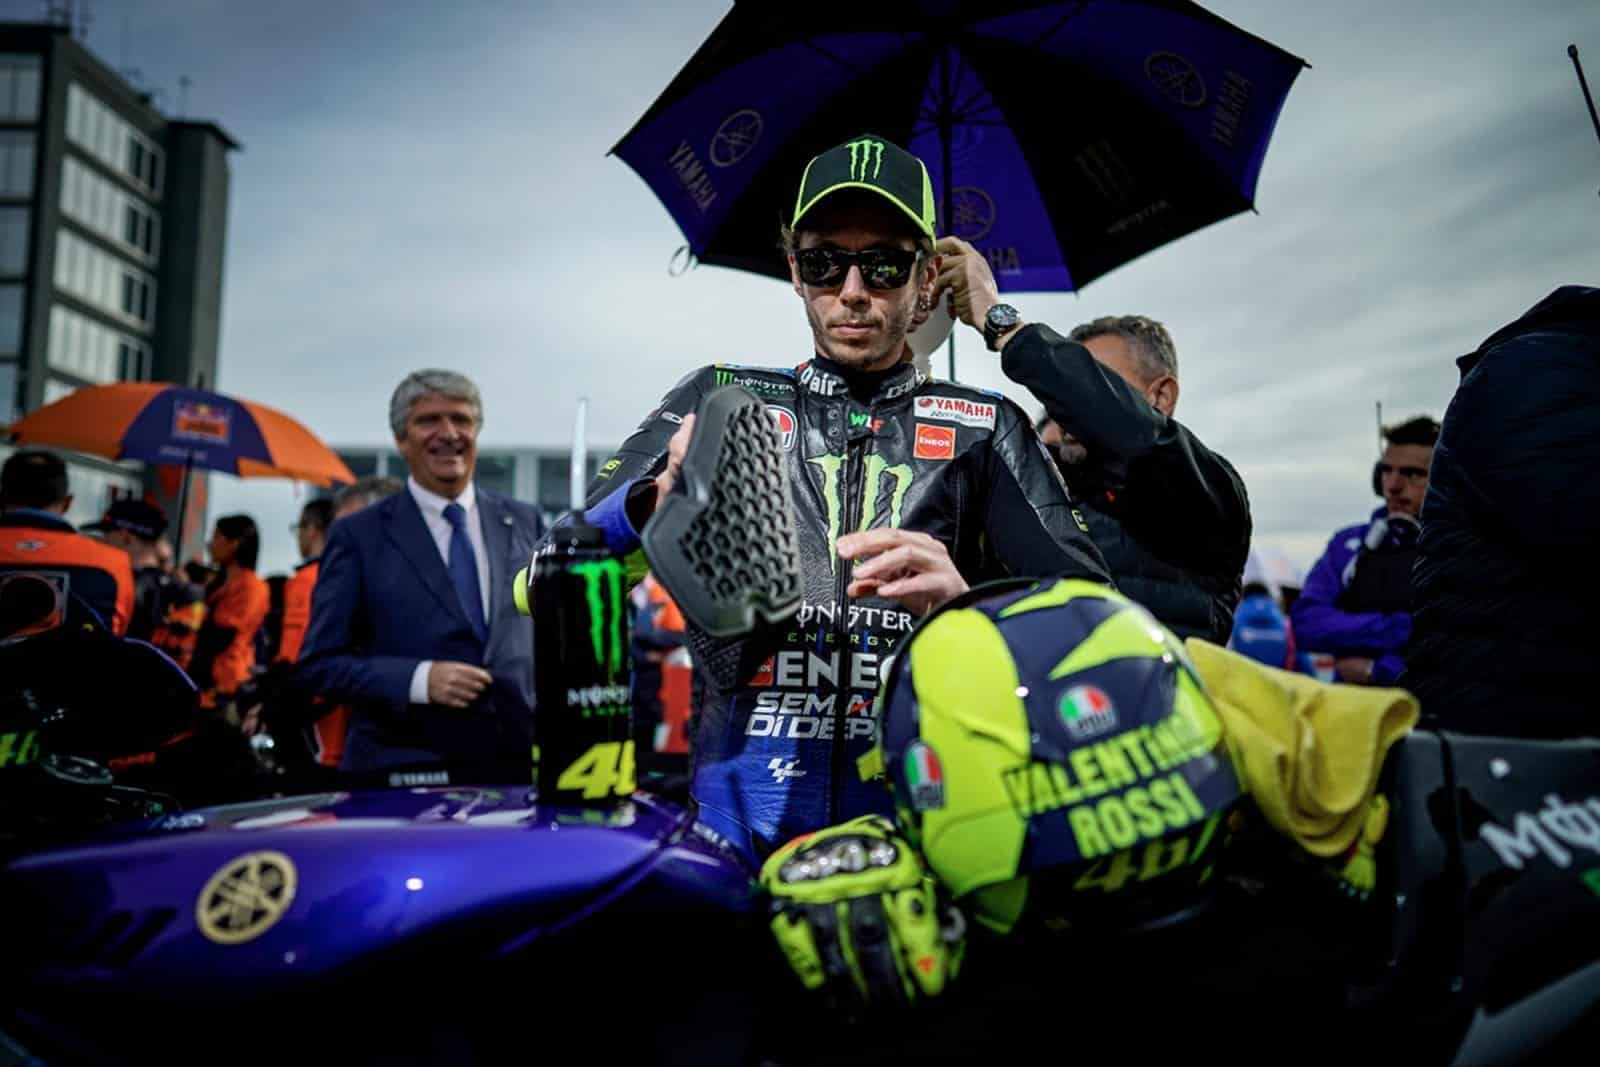 Valentino Rossi on the grid ahead of the 2019 MotoGP Grand Prix of Valencia